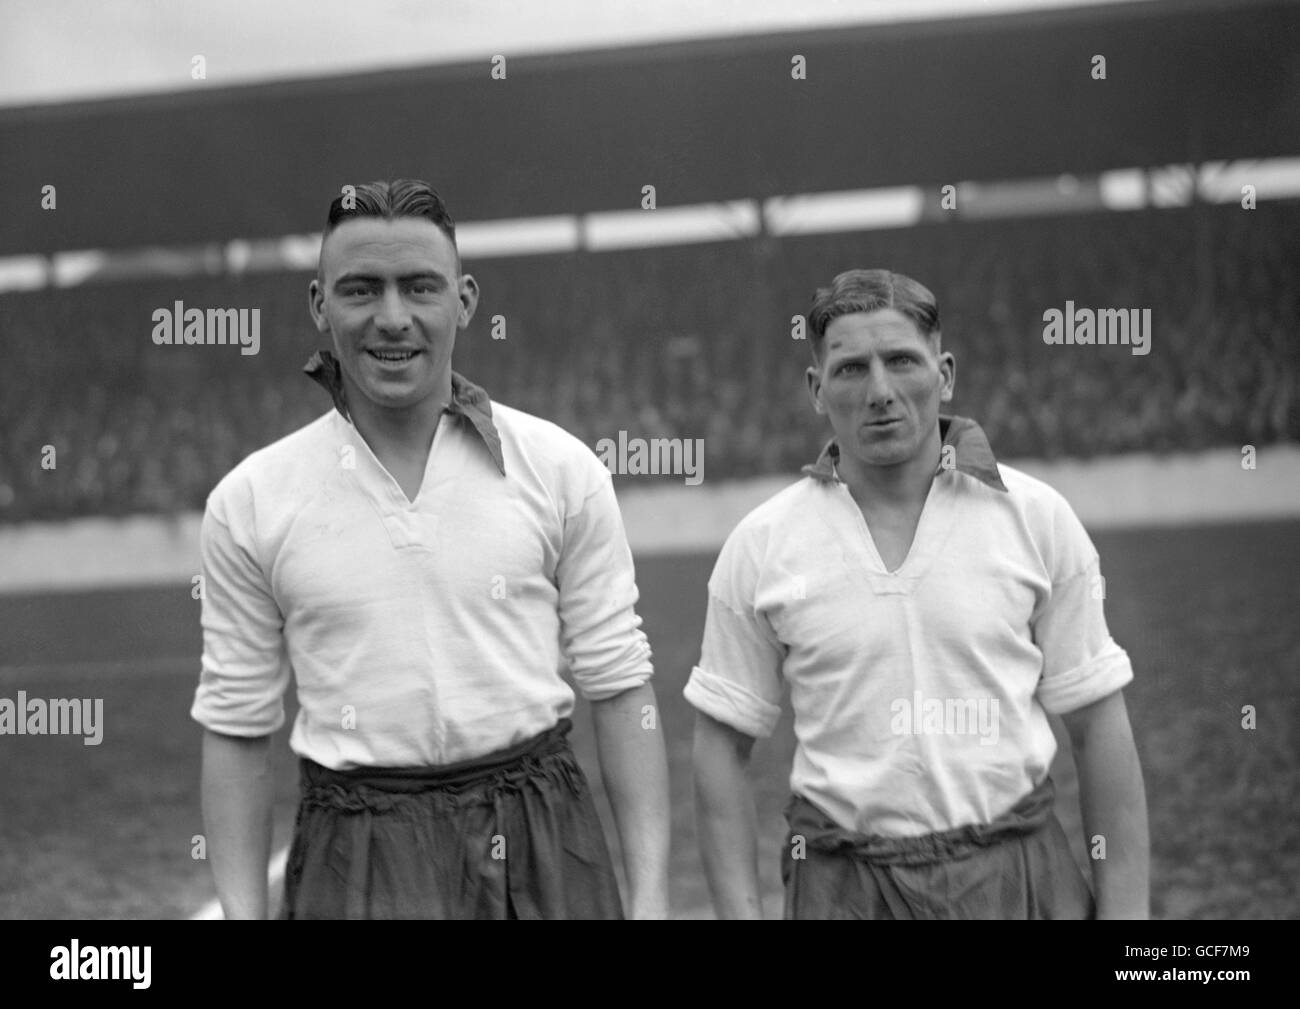 Soccer - League Division Two - Bury v Doncaster - Gigg Lane. Bury players David Jones (left) and George Raynor. Stock Photo